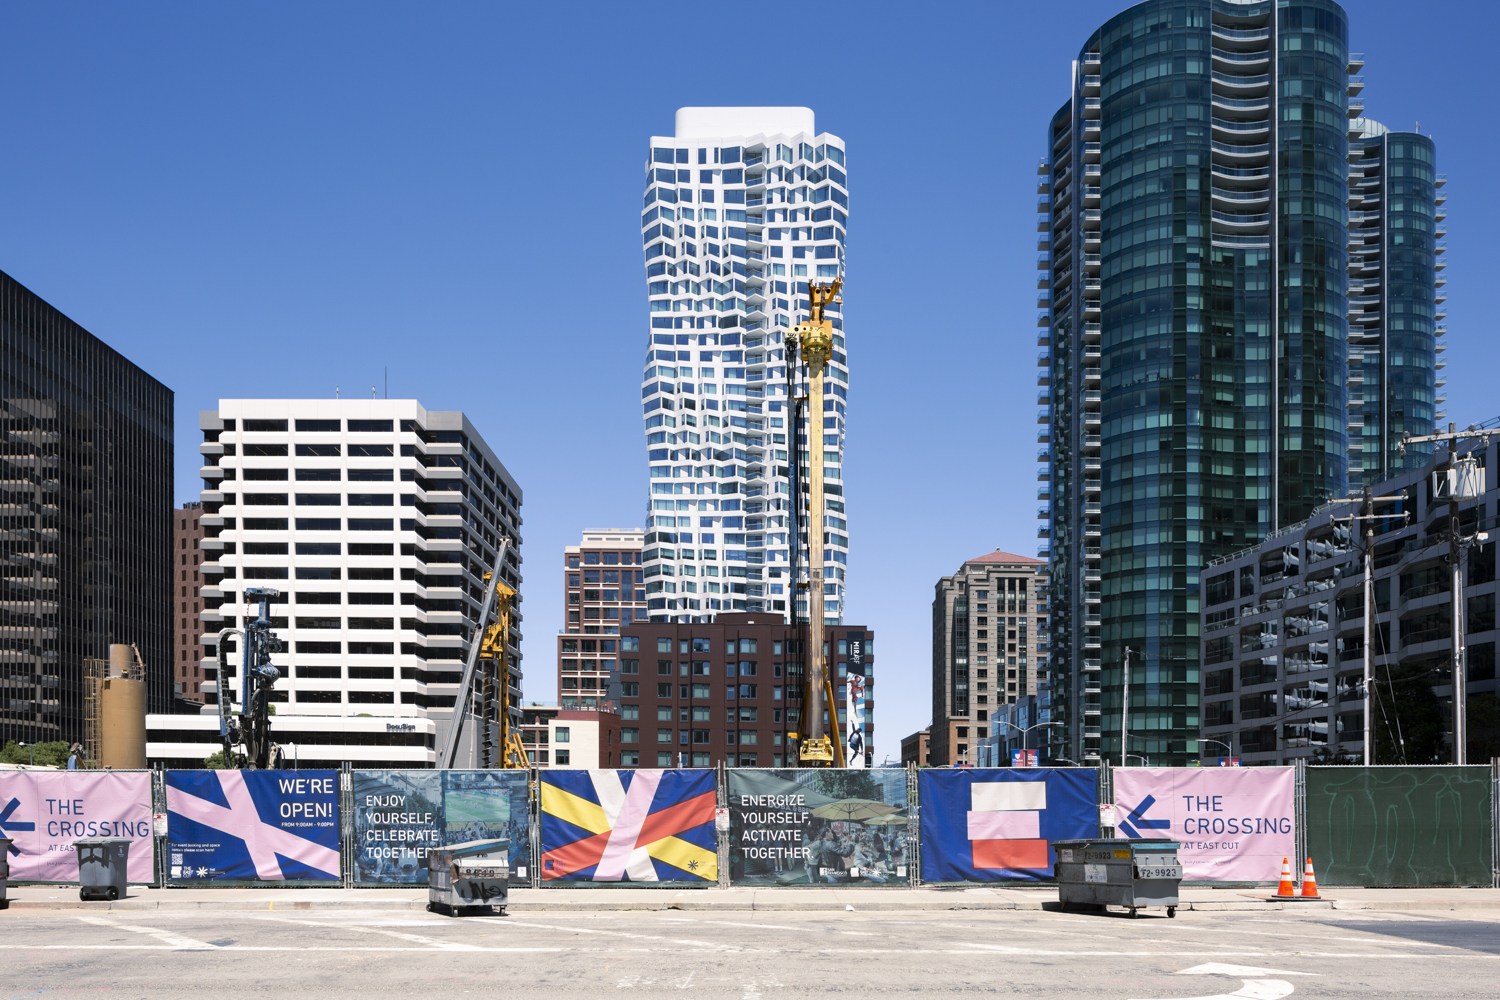 Transbay Block 2 image from Beale Street, image by Andrew Campbell Nelson